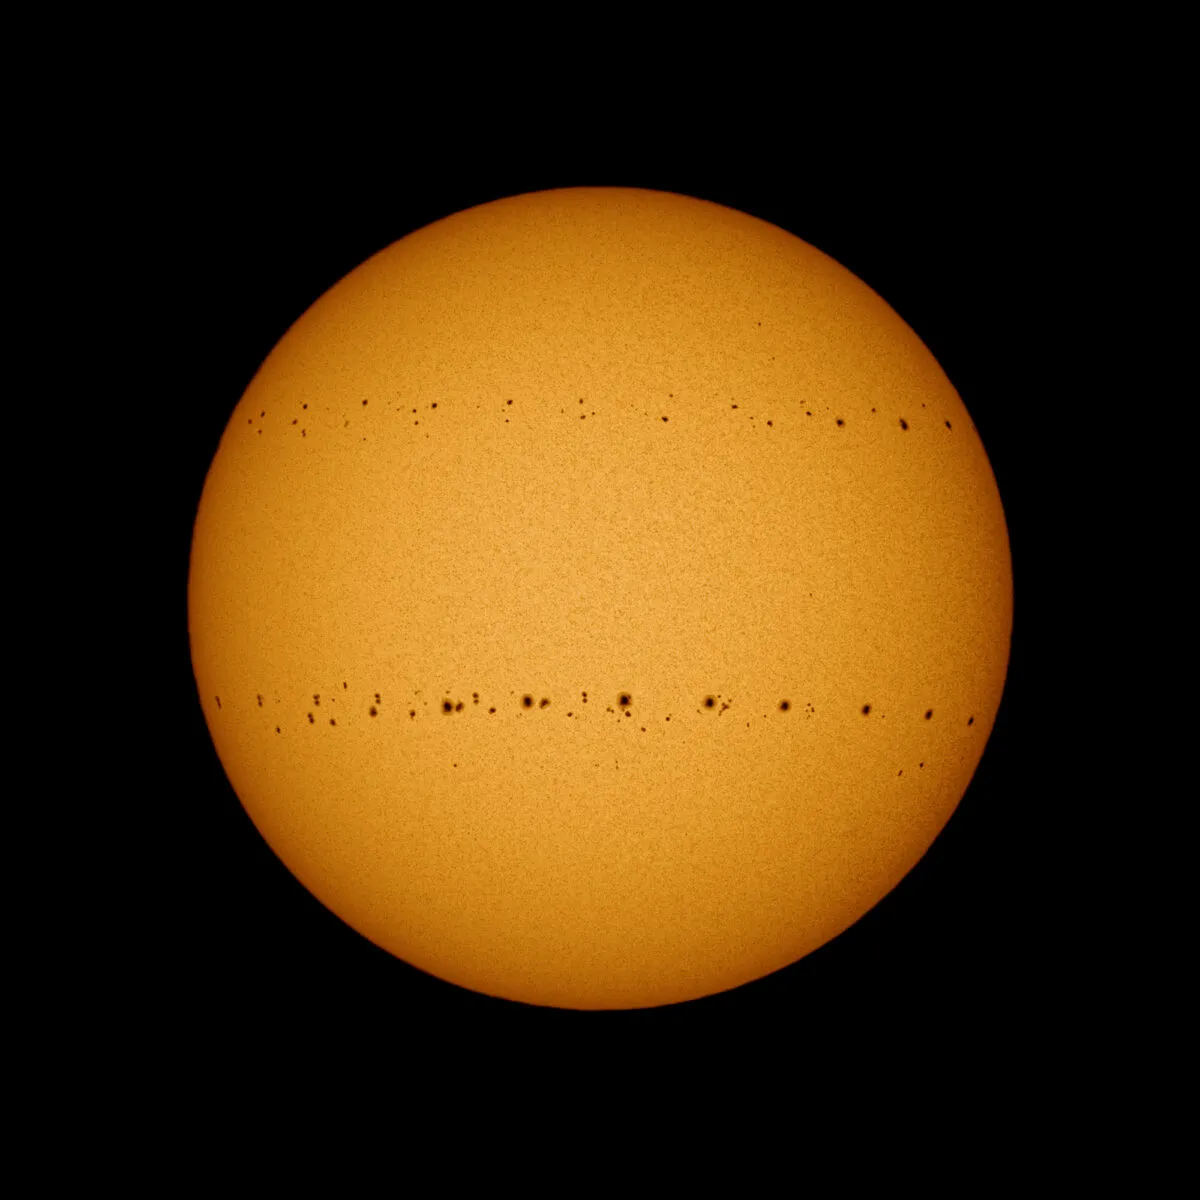 A composite image showing the movement of sunspots over a period of 100 days. Credit: Soumyadeep Mukherjee